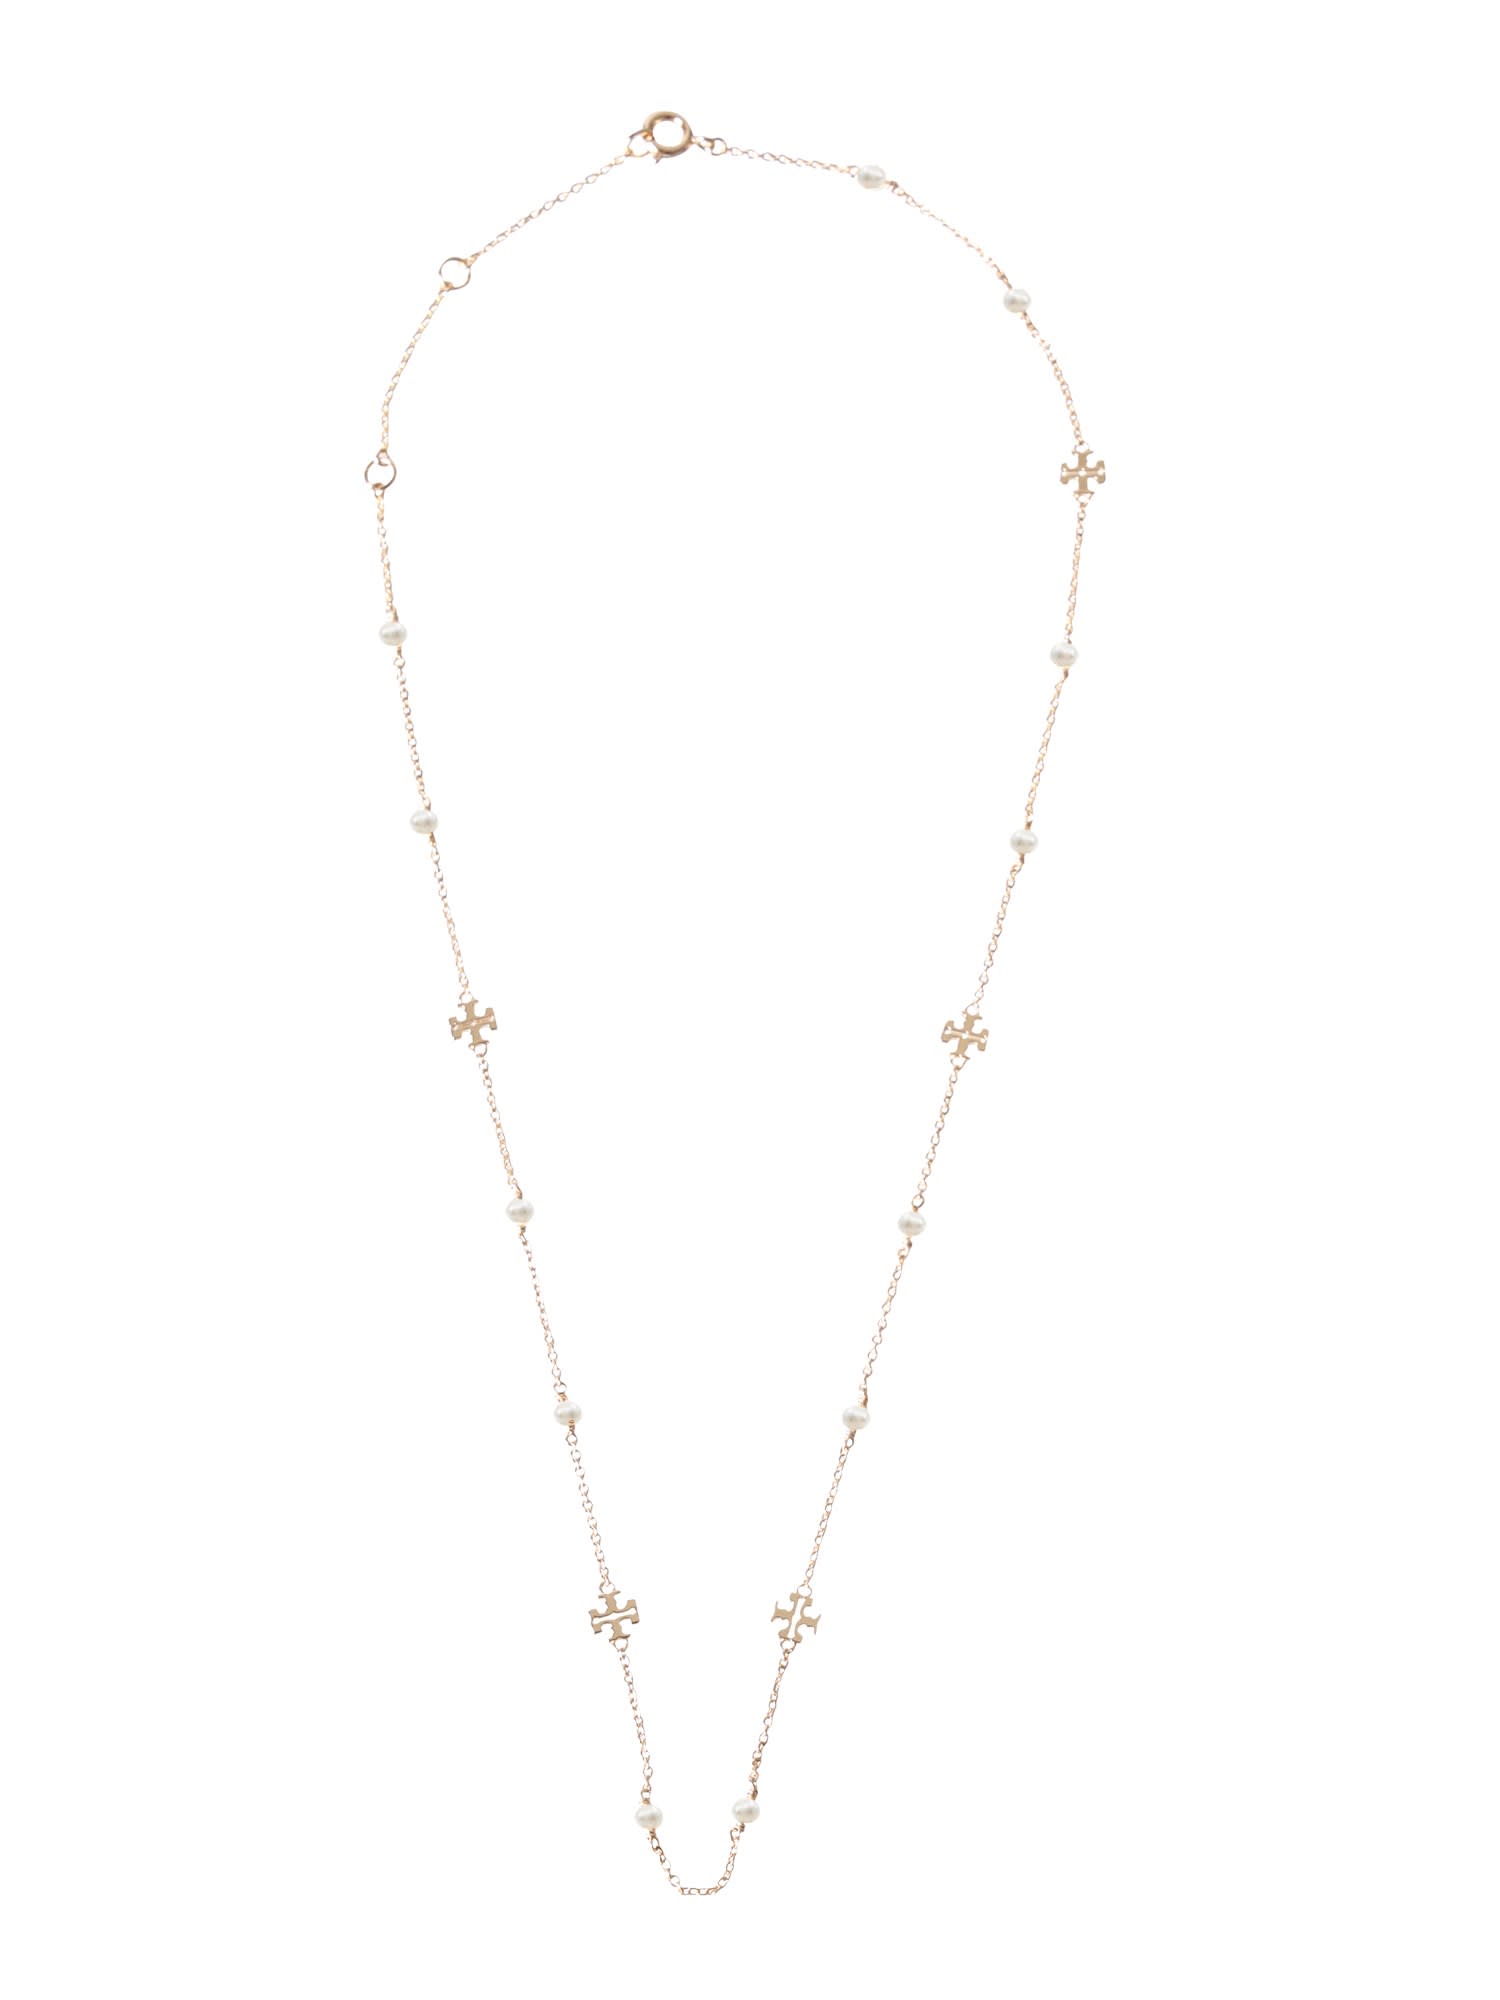 Tory Burch Kira Necklace With Logo And Pearls